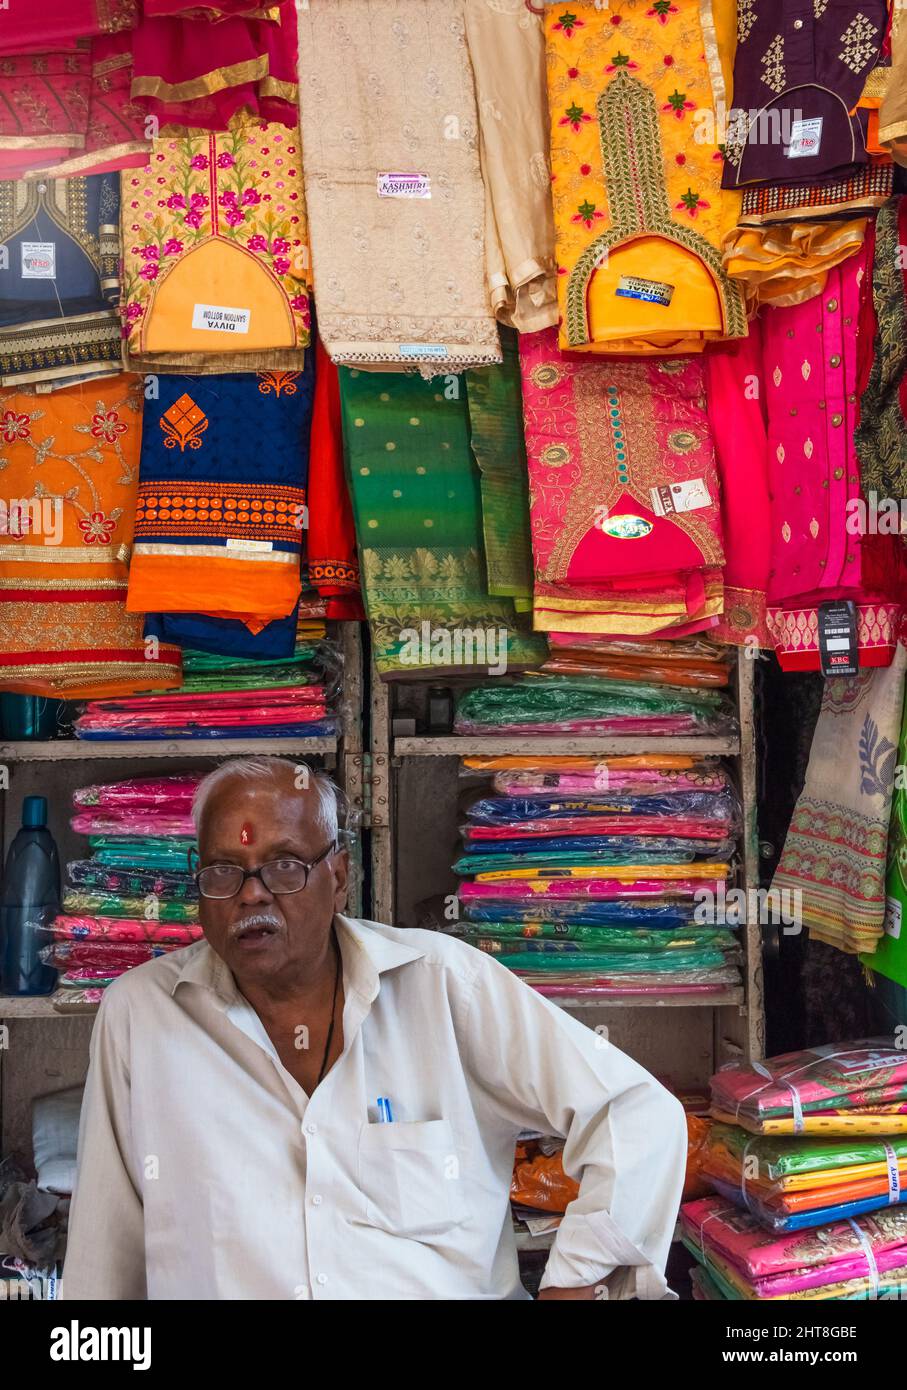 Shop owner selling fabric, Chandni Chowk (Moonlight Square), Delhi, India Stock Photo